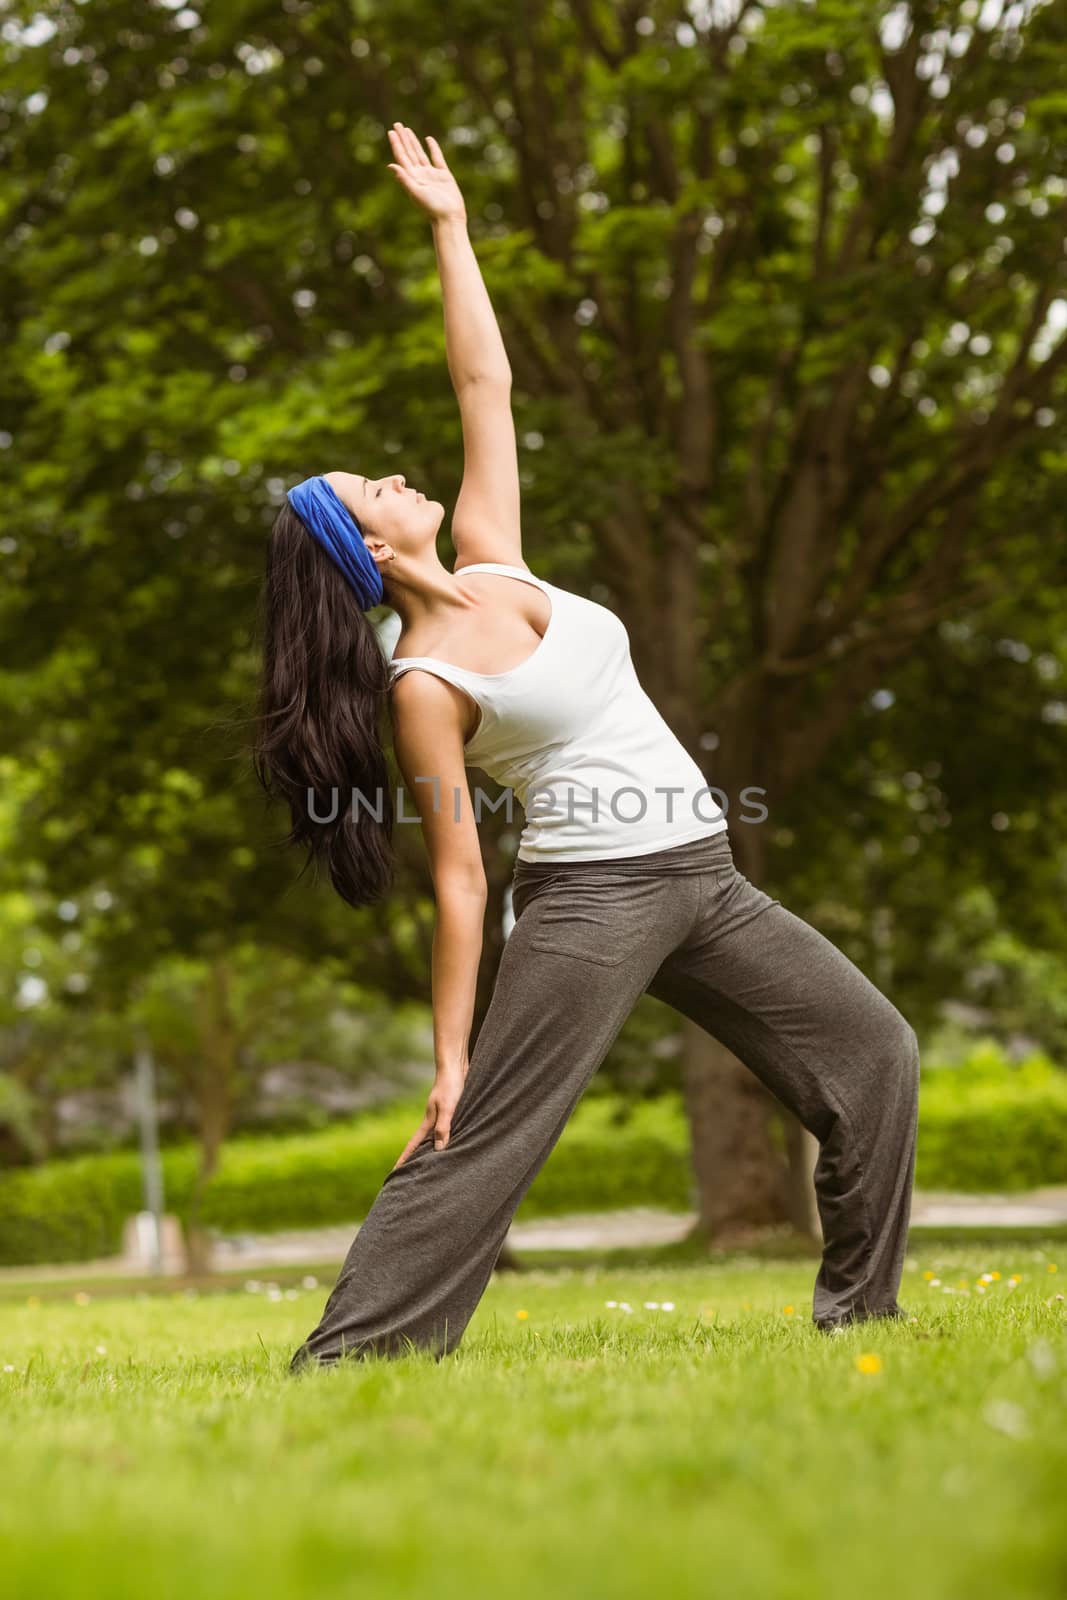 Cheerful brown hair doing yoga on grass in the park